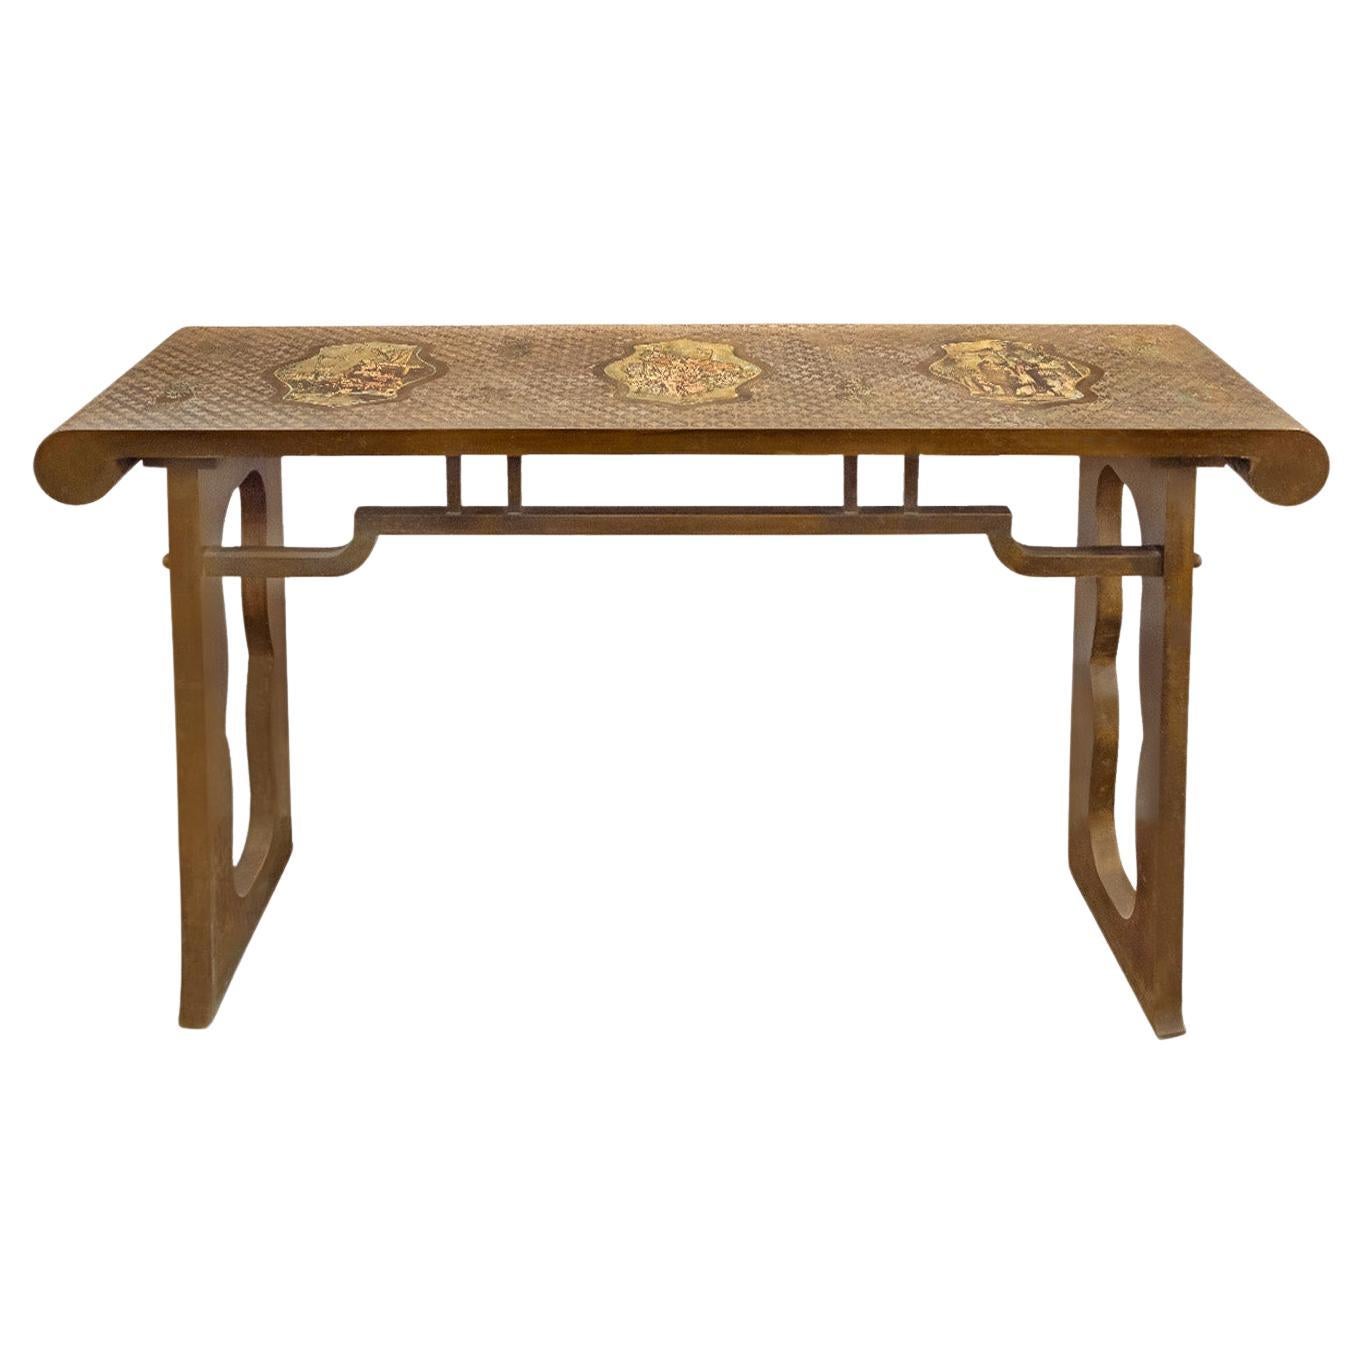 Philip and Kelvin LaVerne Rare "Kuan Yin Console Table" 1960s (Signed)